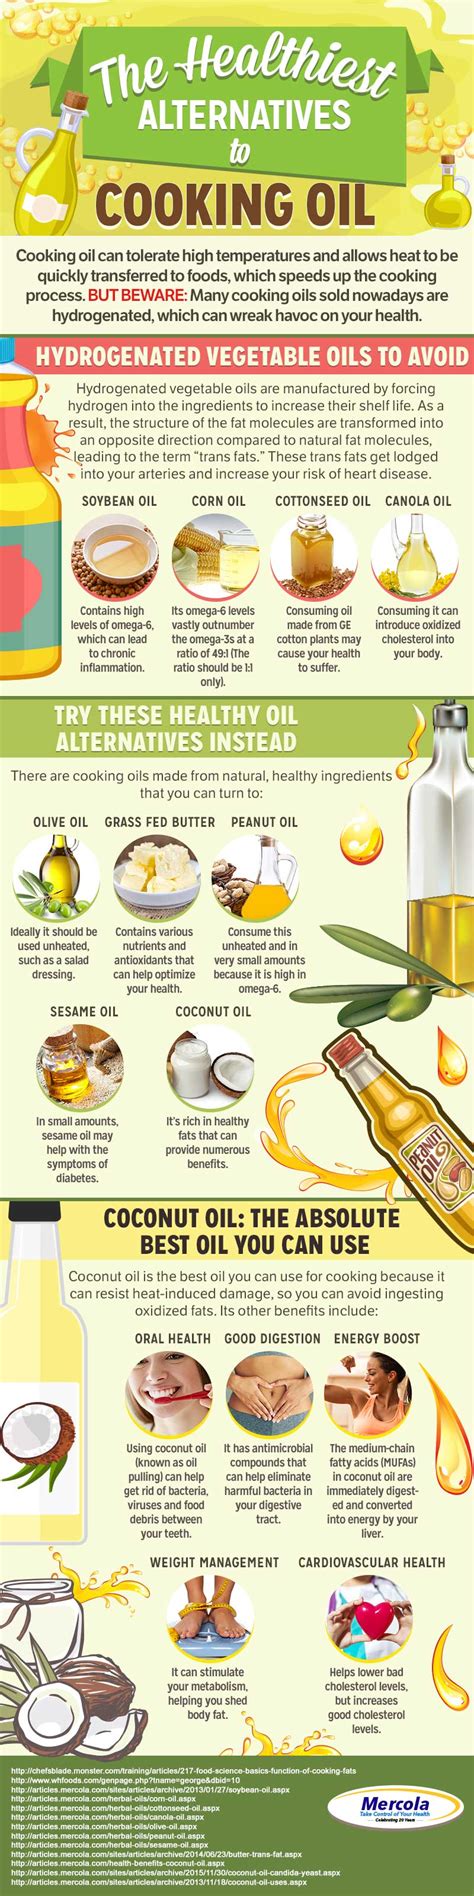 What Is The Healthiest Cooking Oil